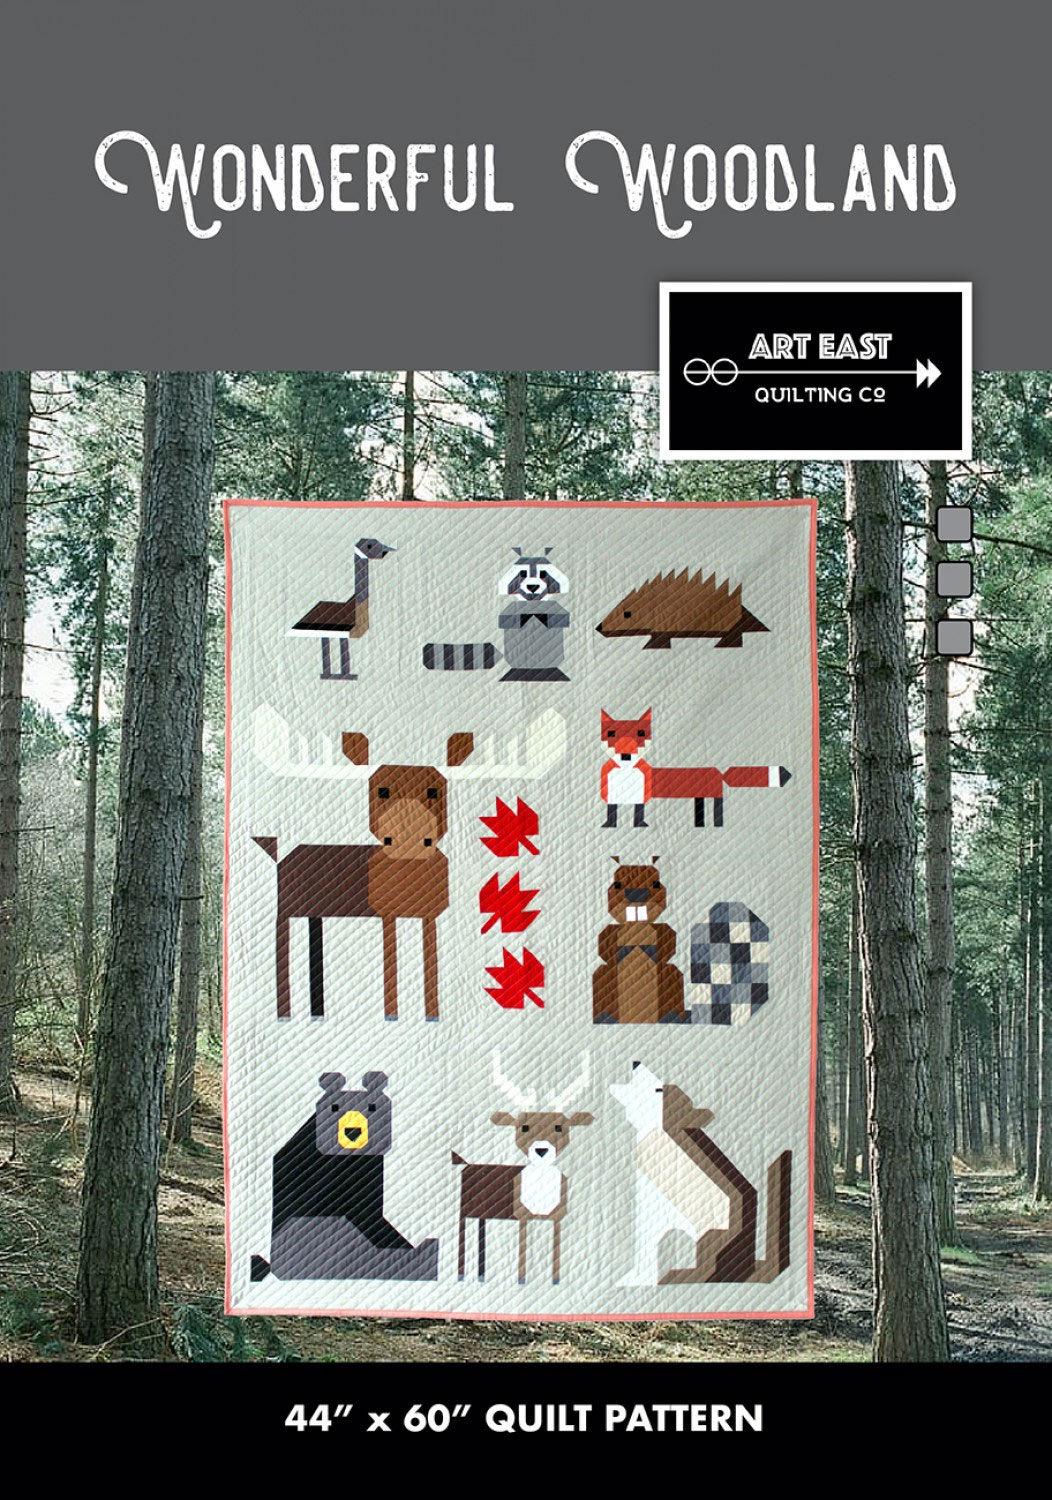 Wonderful-Woodland-quilt-sewing-pattern-Art-East-Quilting-Co-front